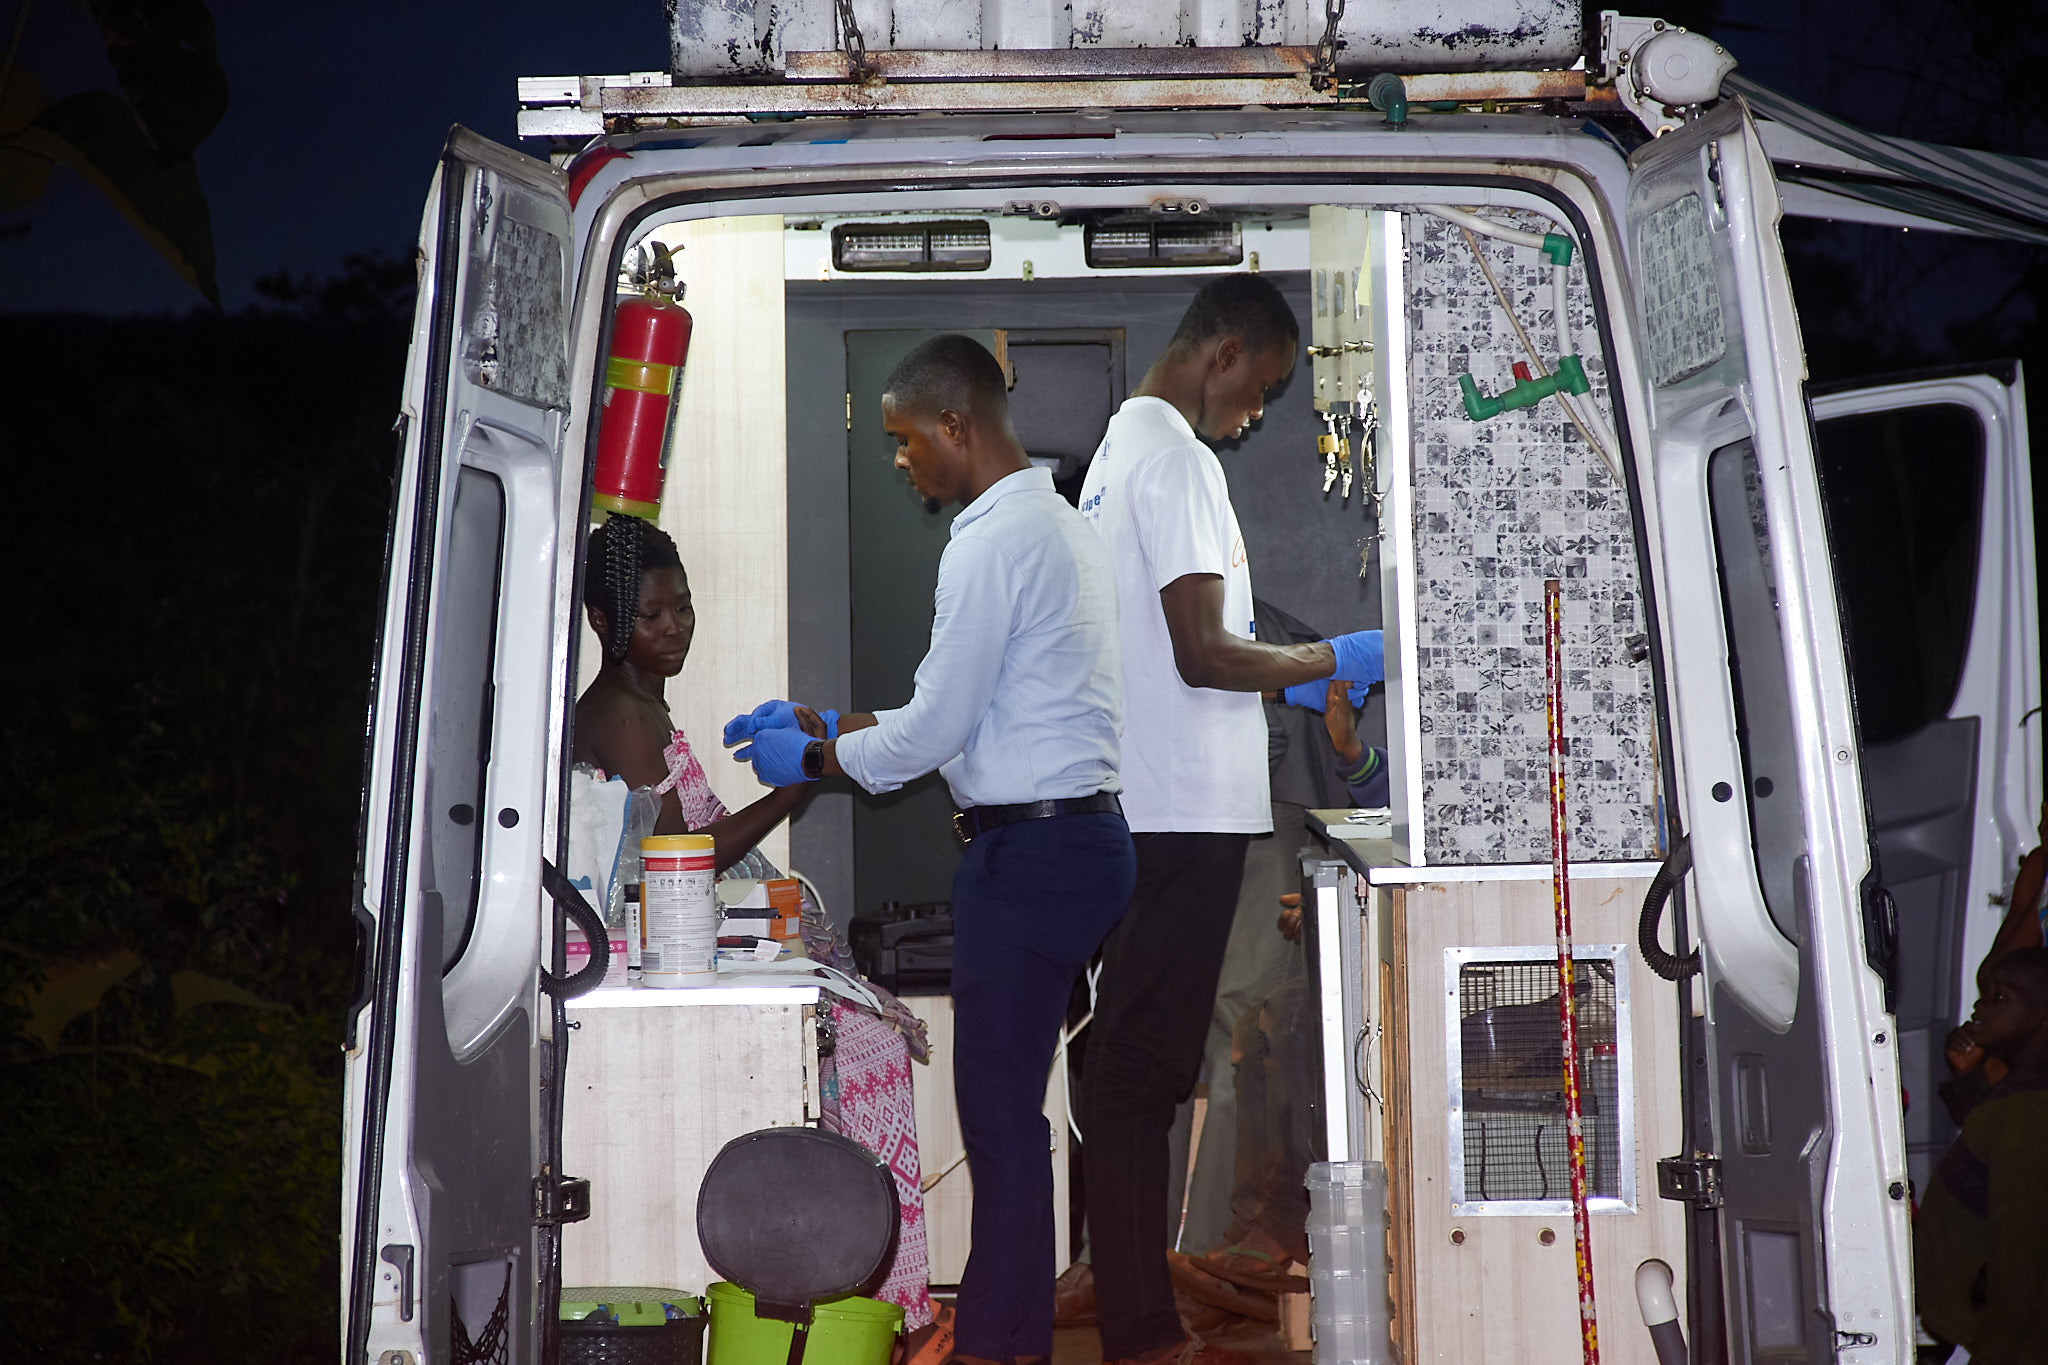 Two men in a van assisting individuals with medical devices.